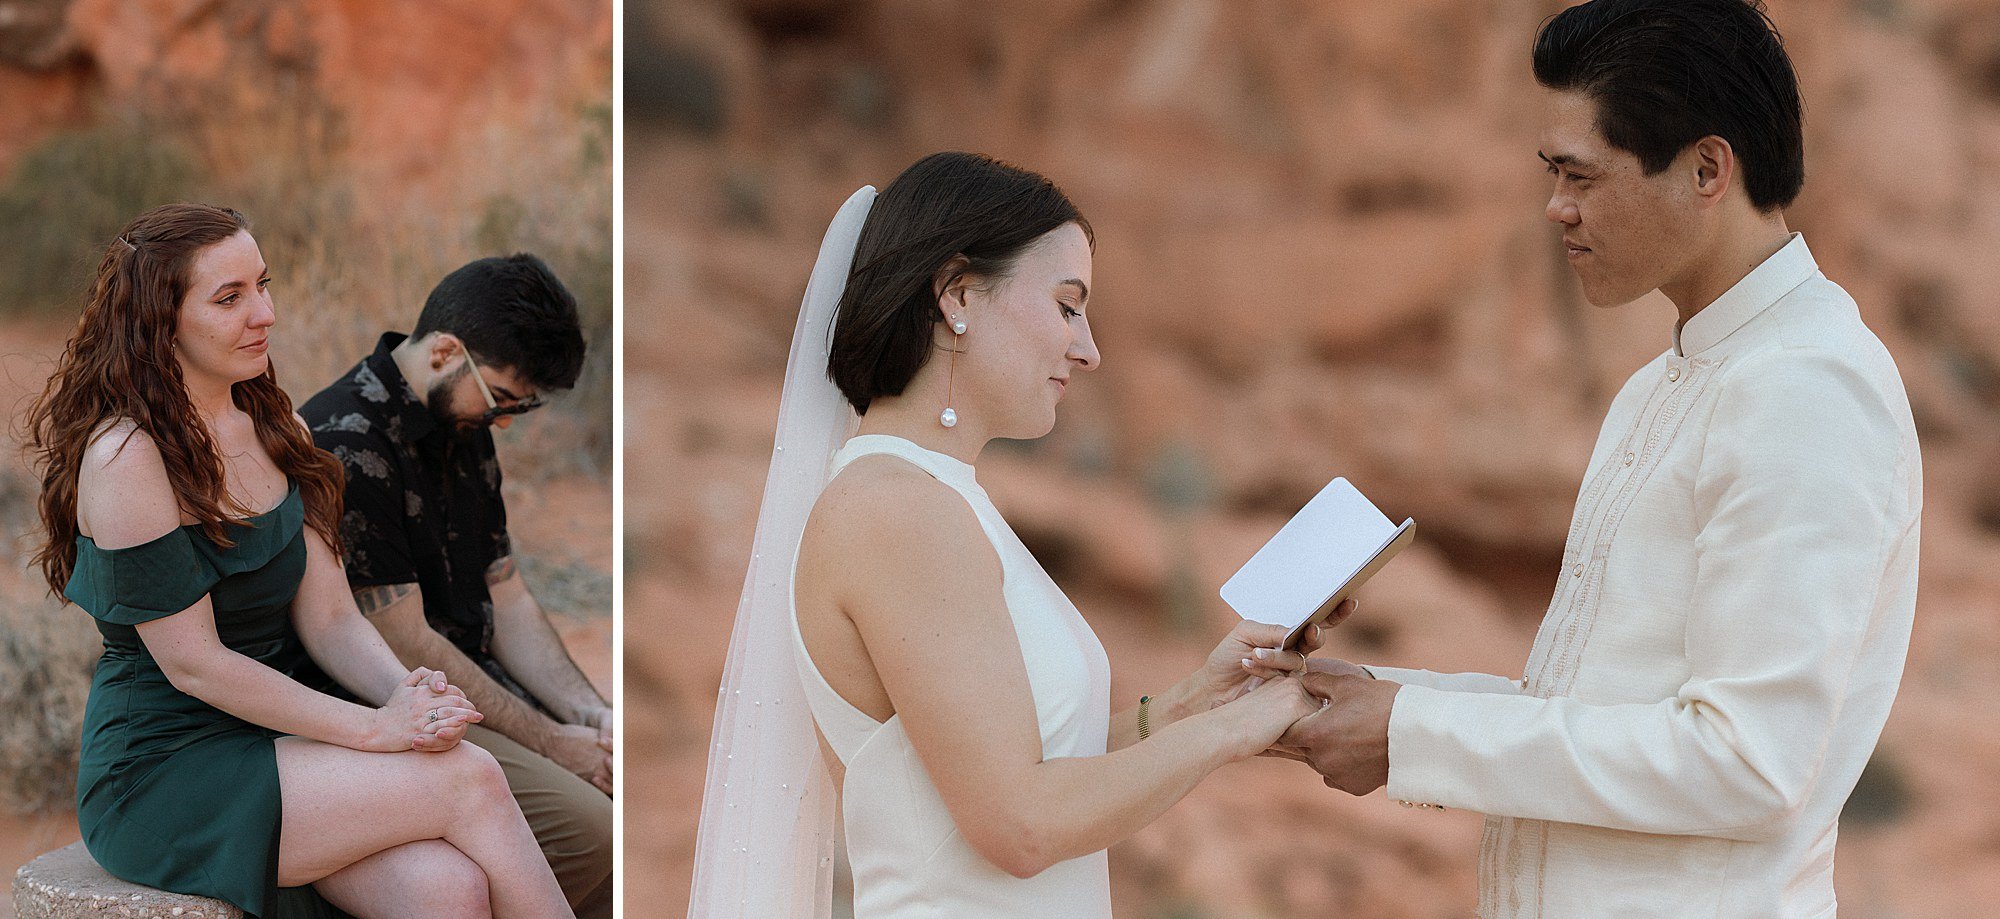 Valley of Fire State Park Elopement, Getting married in Valley of Fire State Park